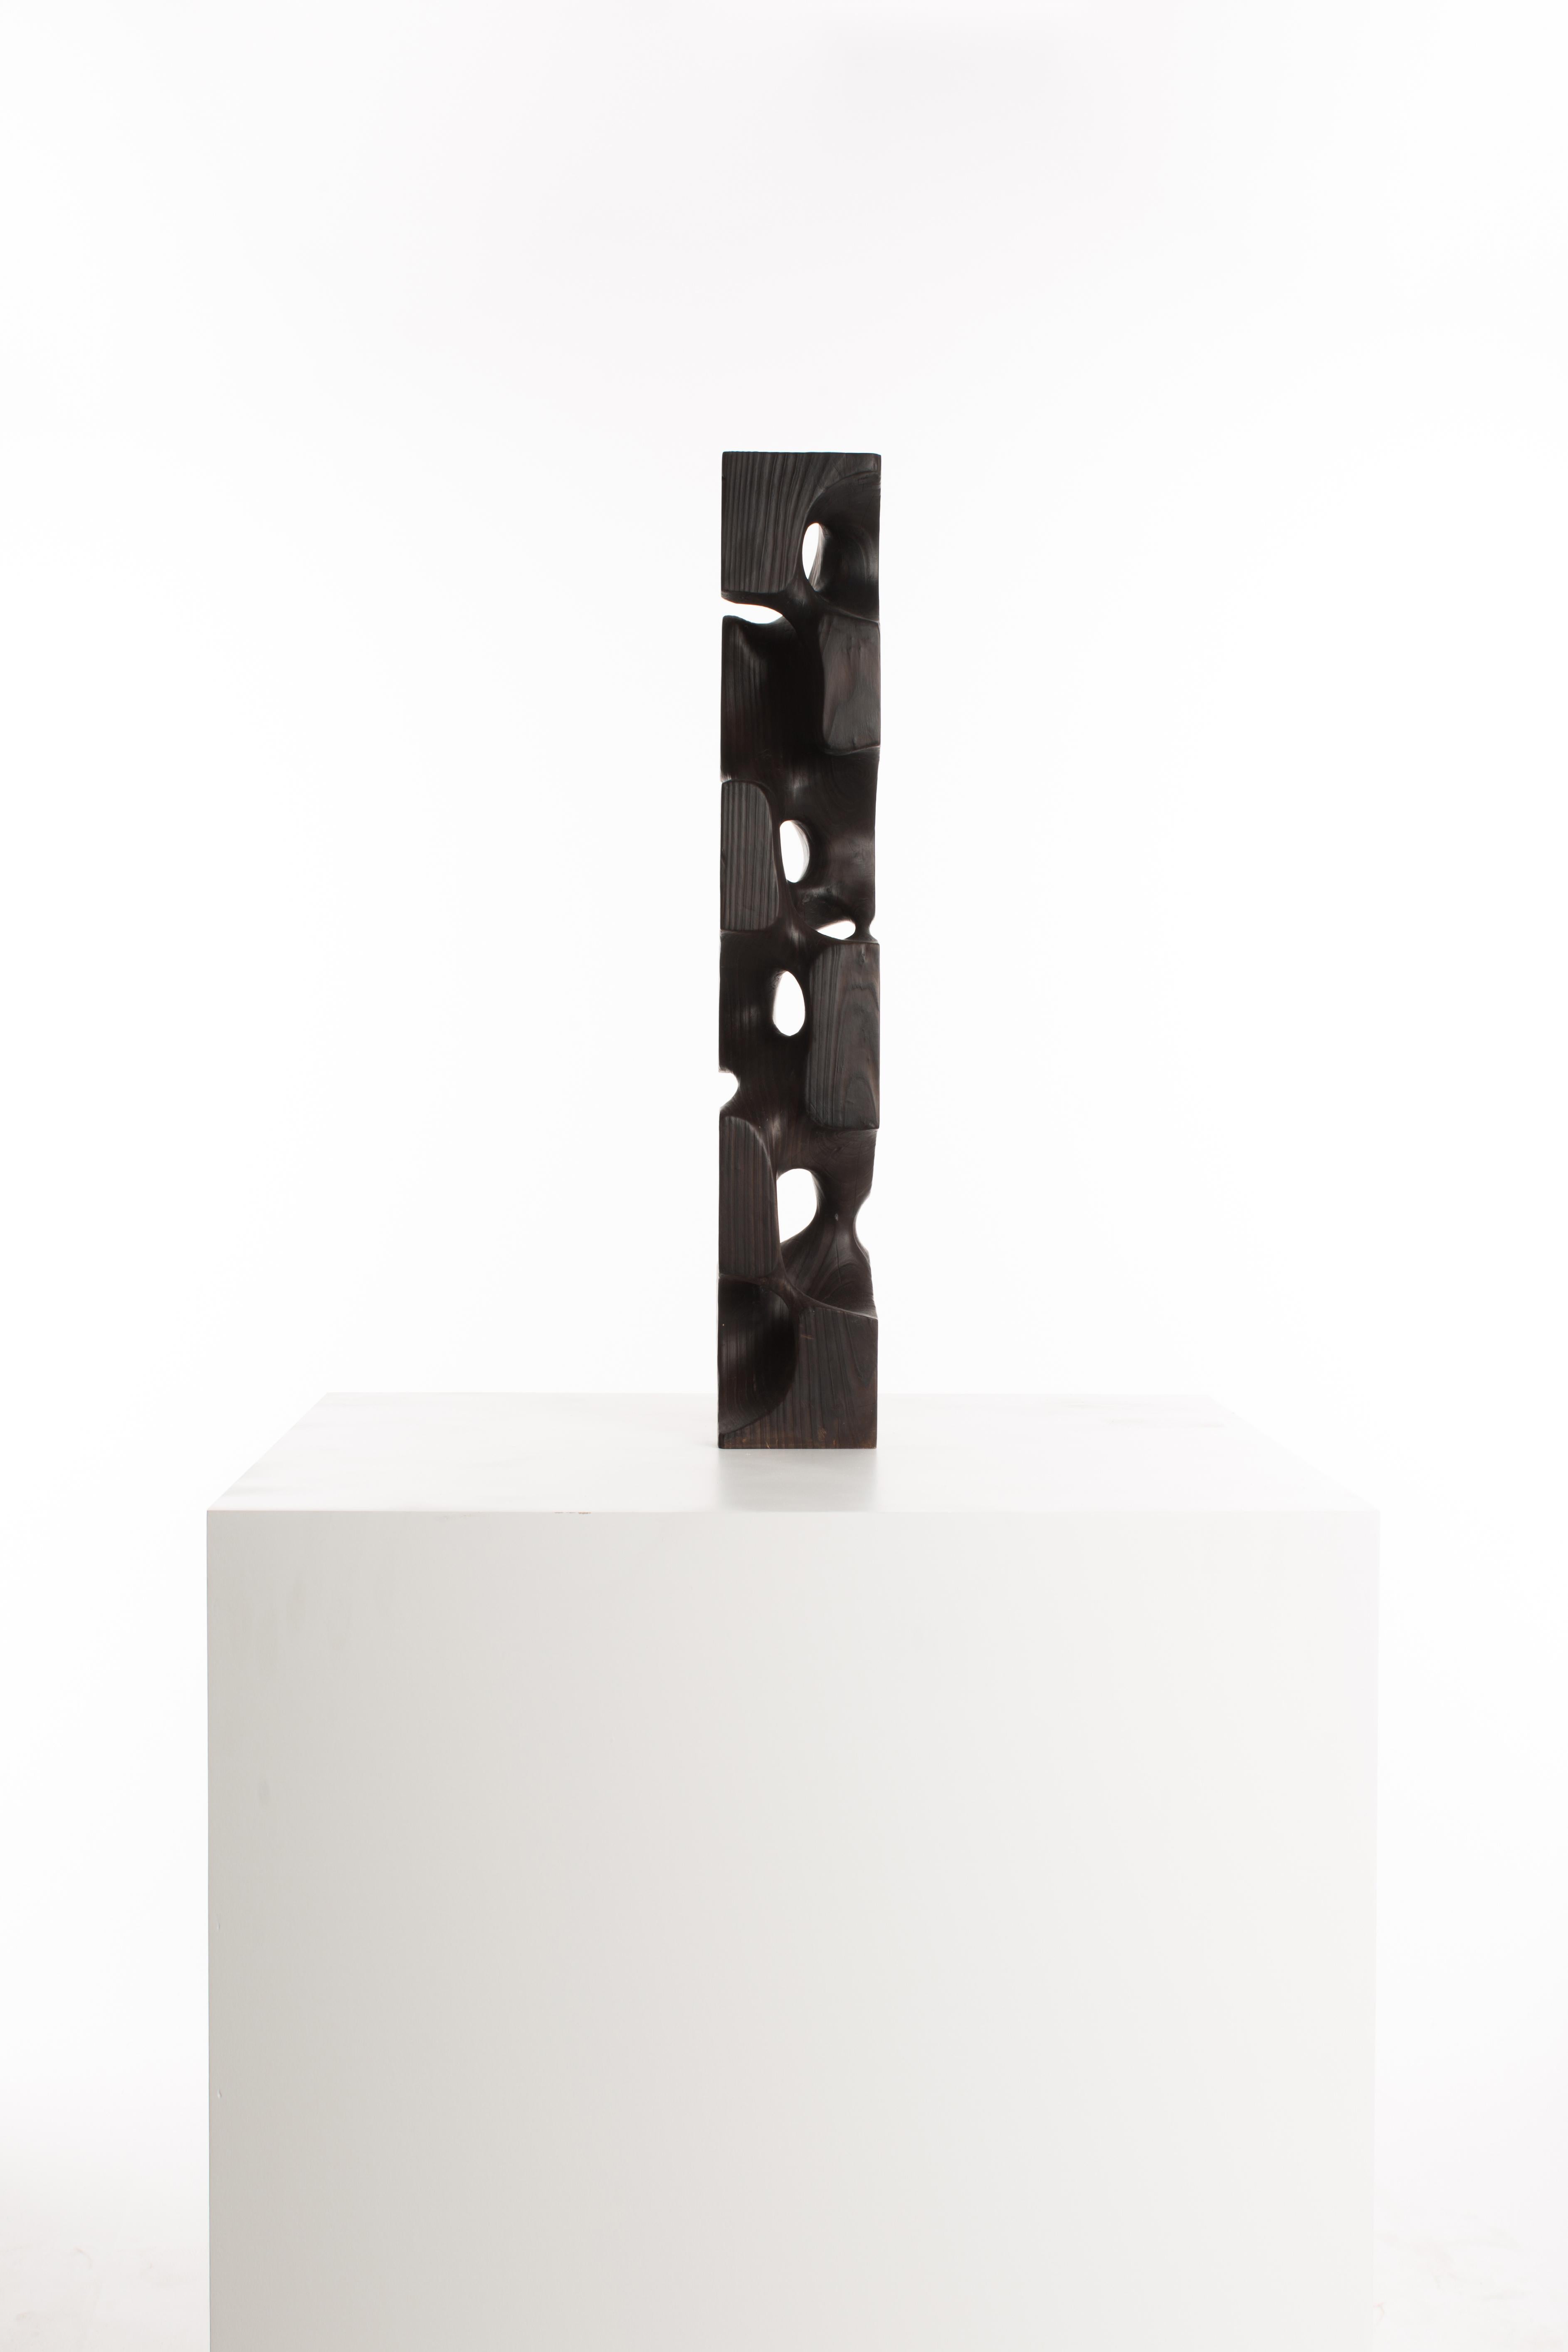 Wooden Cuboid 004 
1/1
Stone Pine / Burnt 
12cm x 12cm x 73cm 
2.9Kg
2020

Crystalized Sculptures is an abstracted exploration of marks left on the physical mind by experiences of emotion and feelings. In Driaan Claassens' work, where whisps portray